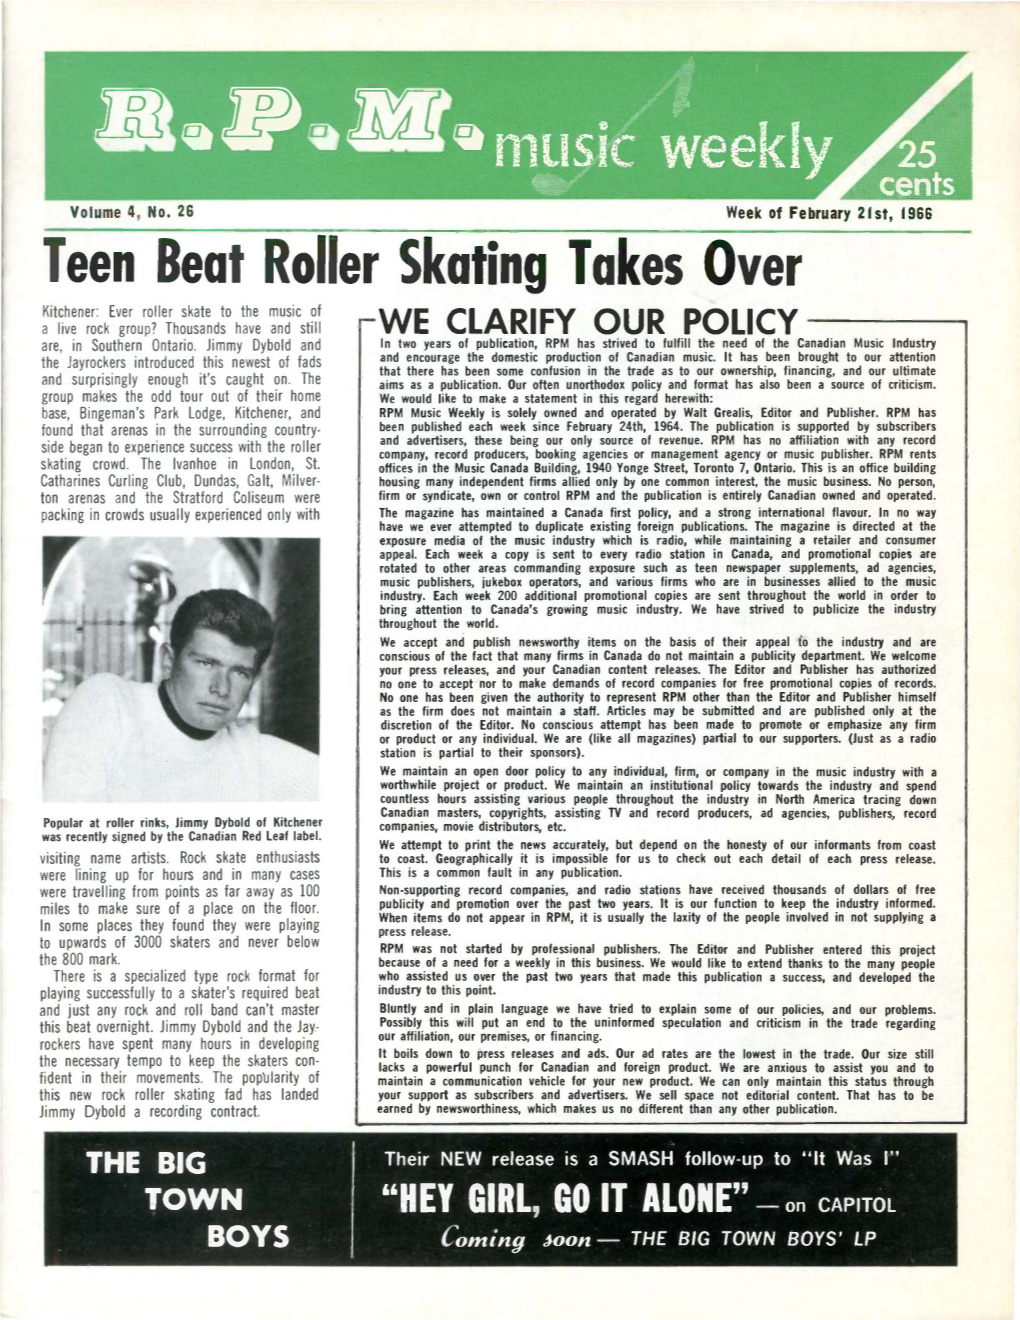 Teen Beat Roller Skating Takes Over